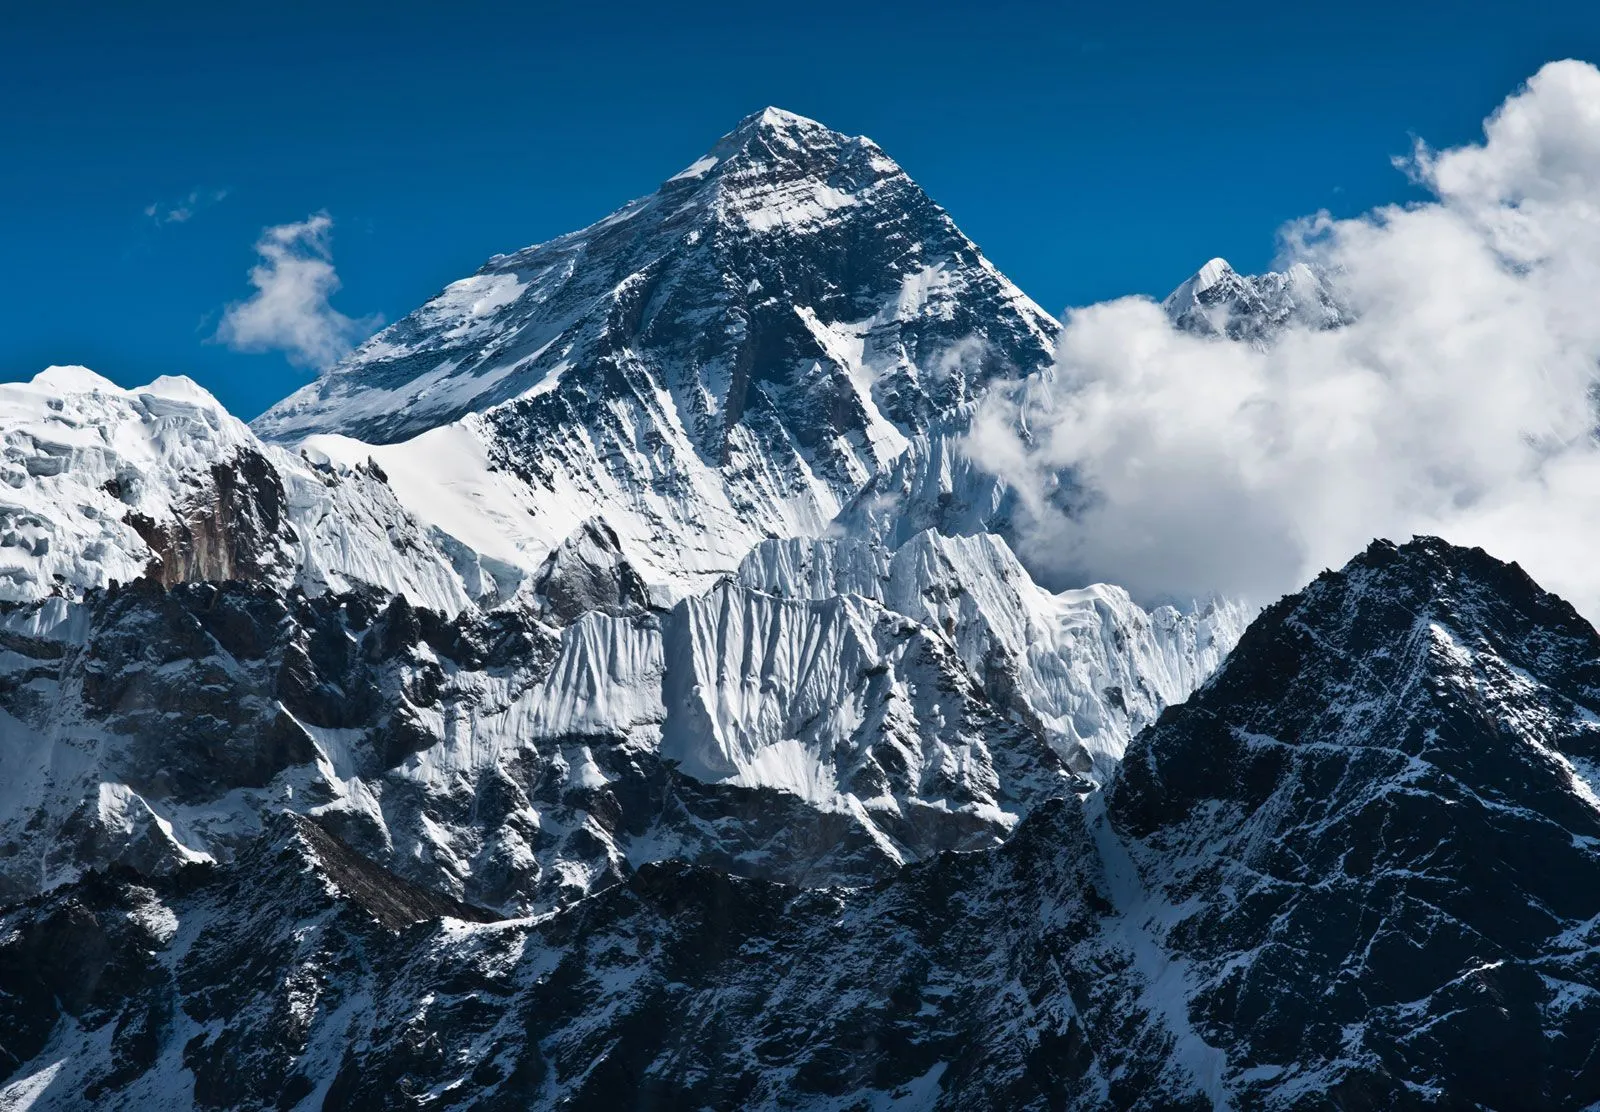 In a setback to Nepal's hopes for mountaineering season, a Norwegian climber hoping to summit Mount Everest tested positive for coronavirus. 